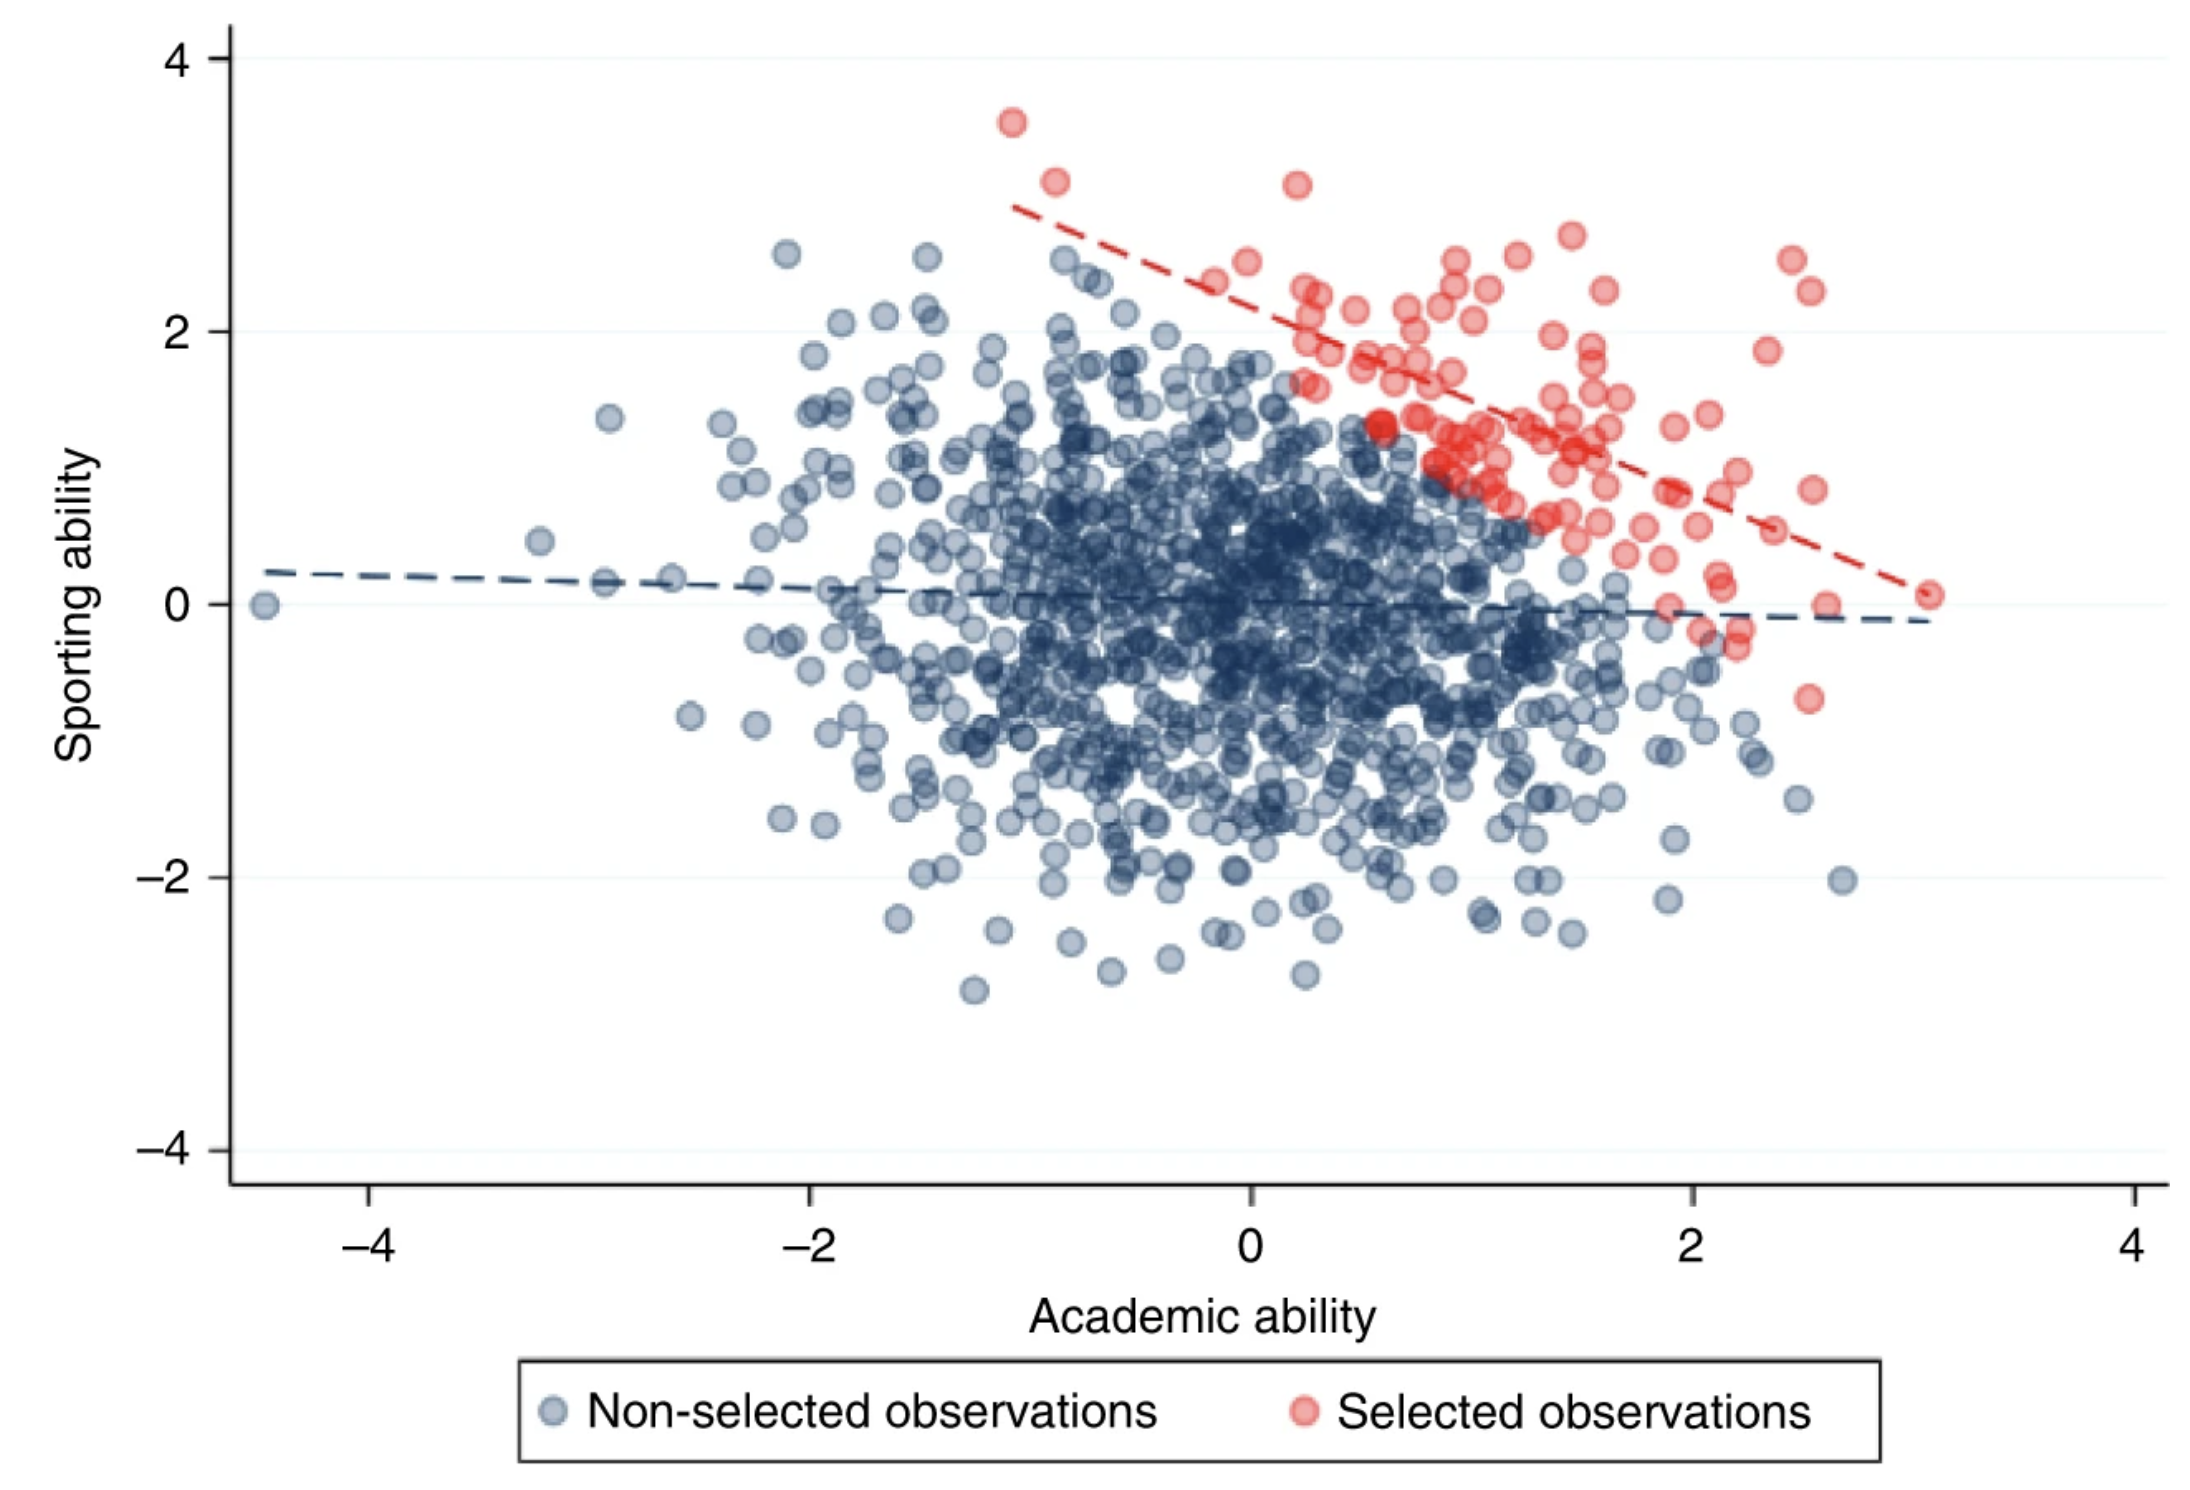 These traits are negligibly correlated in the general population (blue), but because they are selected for enrolment they become strongly correlated when analysing only the selected individuals (red). Extracted from (Griffith et al. 2020).